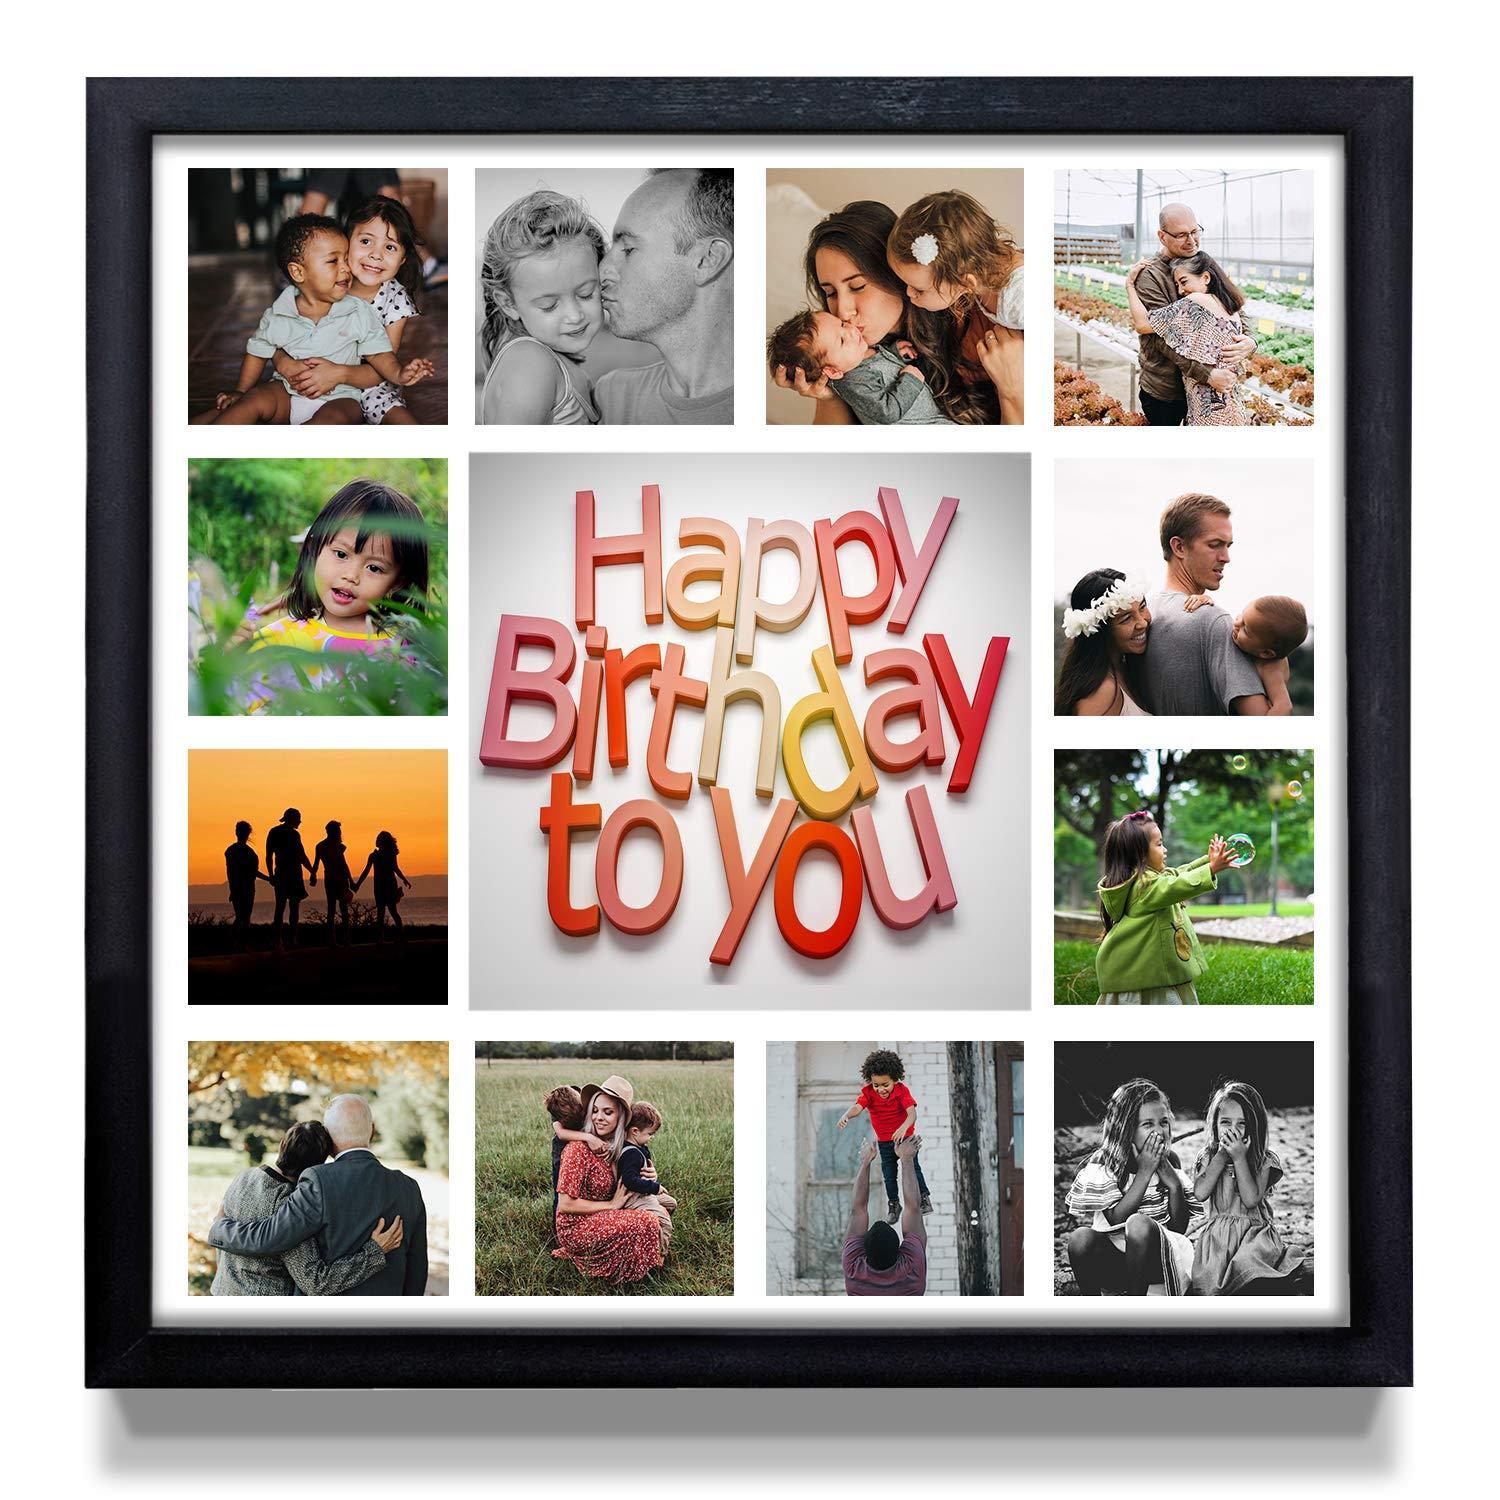 Buy Happy Birthday Collage Frame 12 X 12 Inches Online at Low Prices in India - Amazon.in